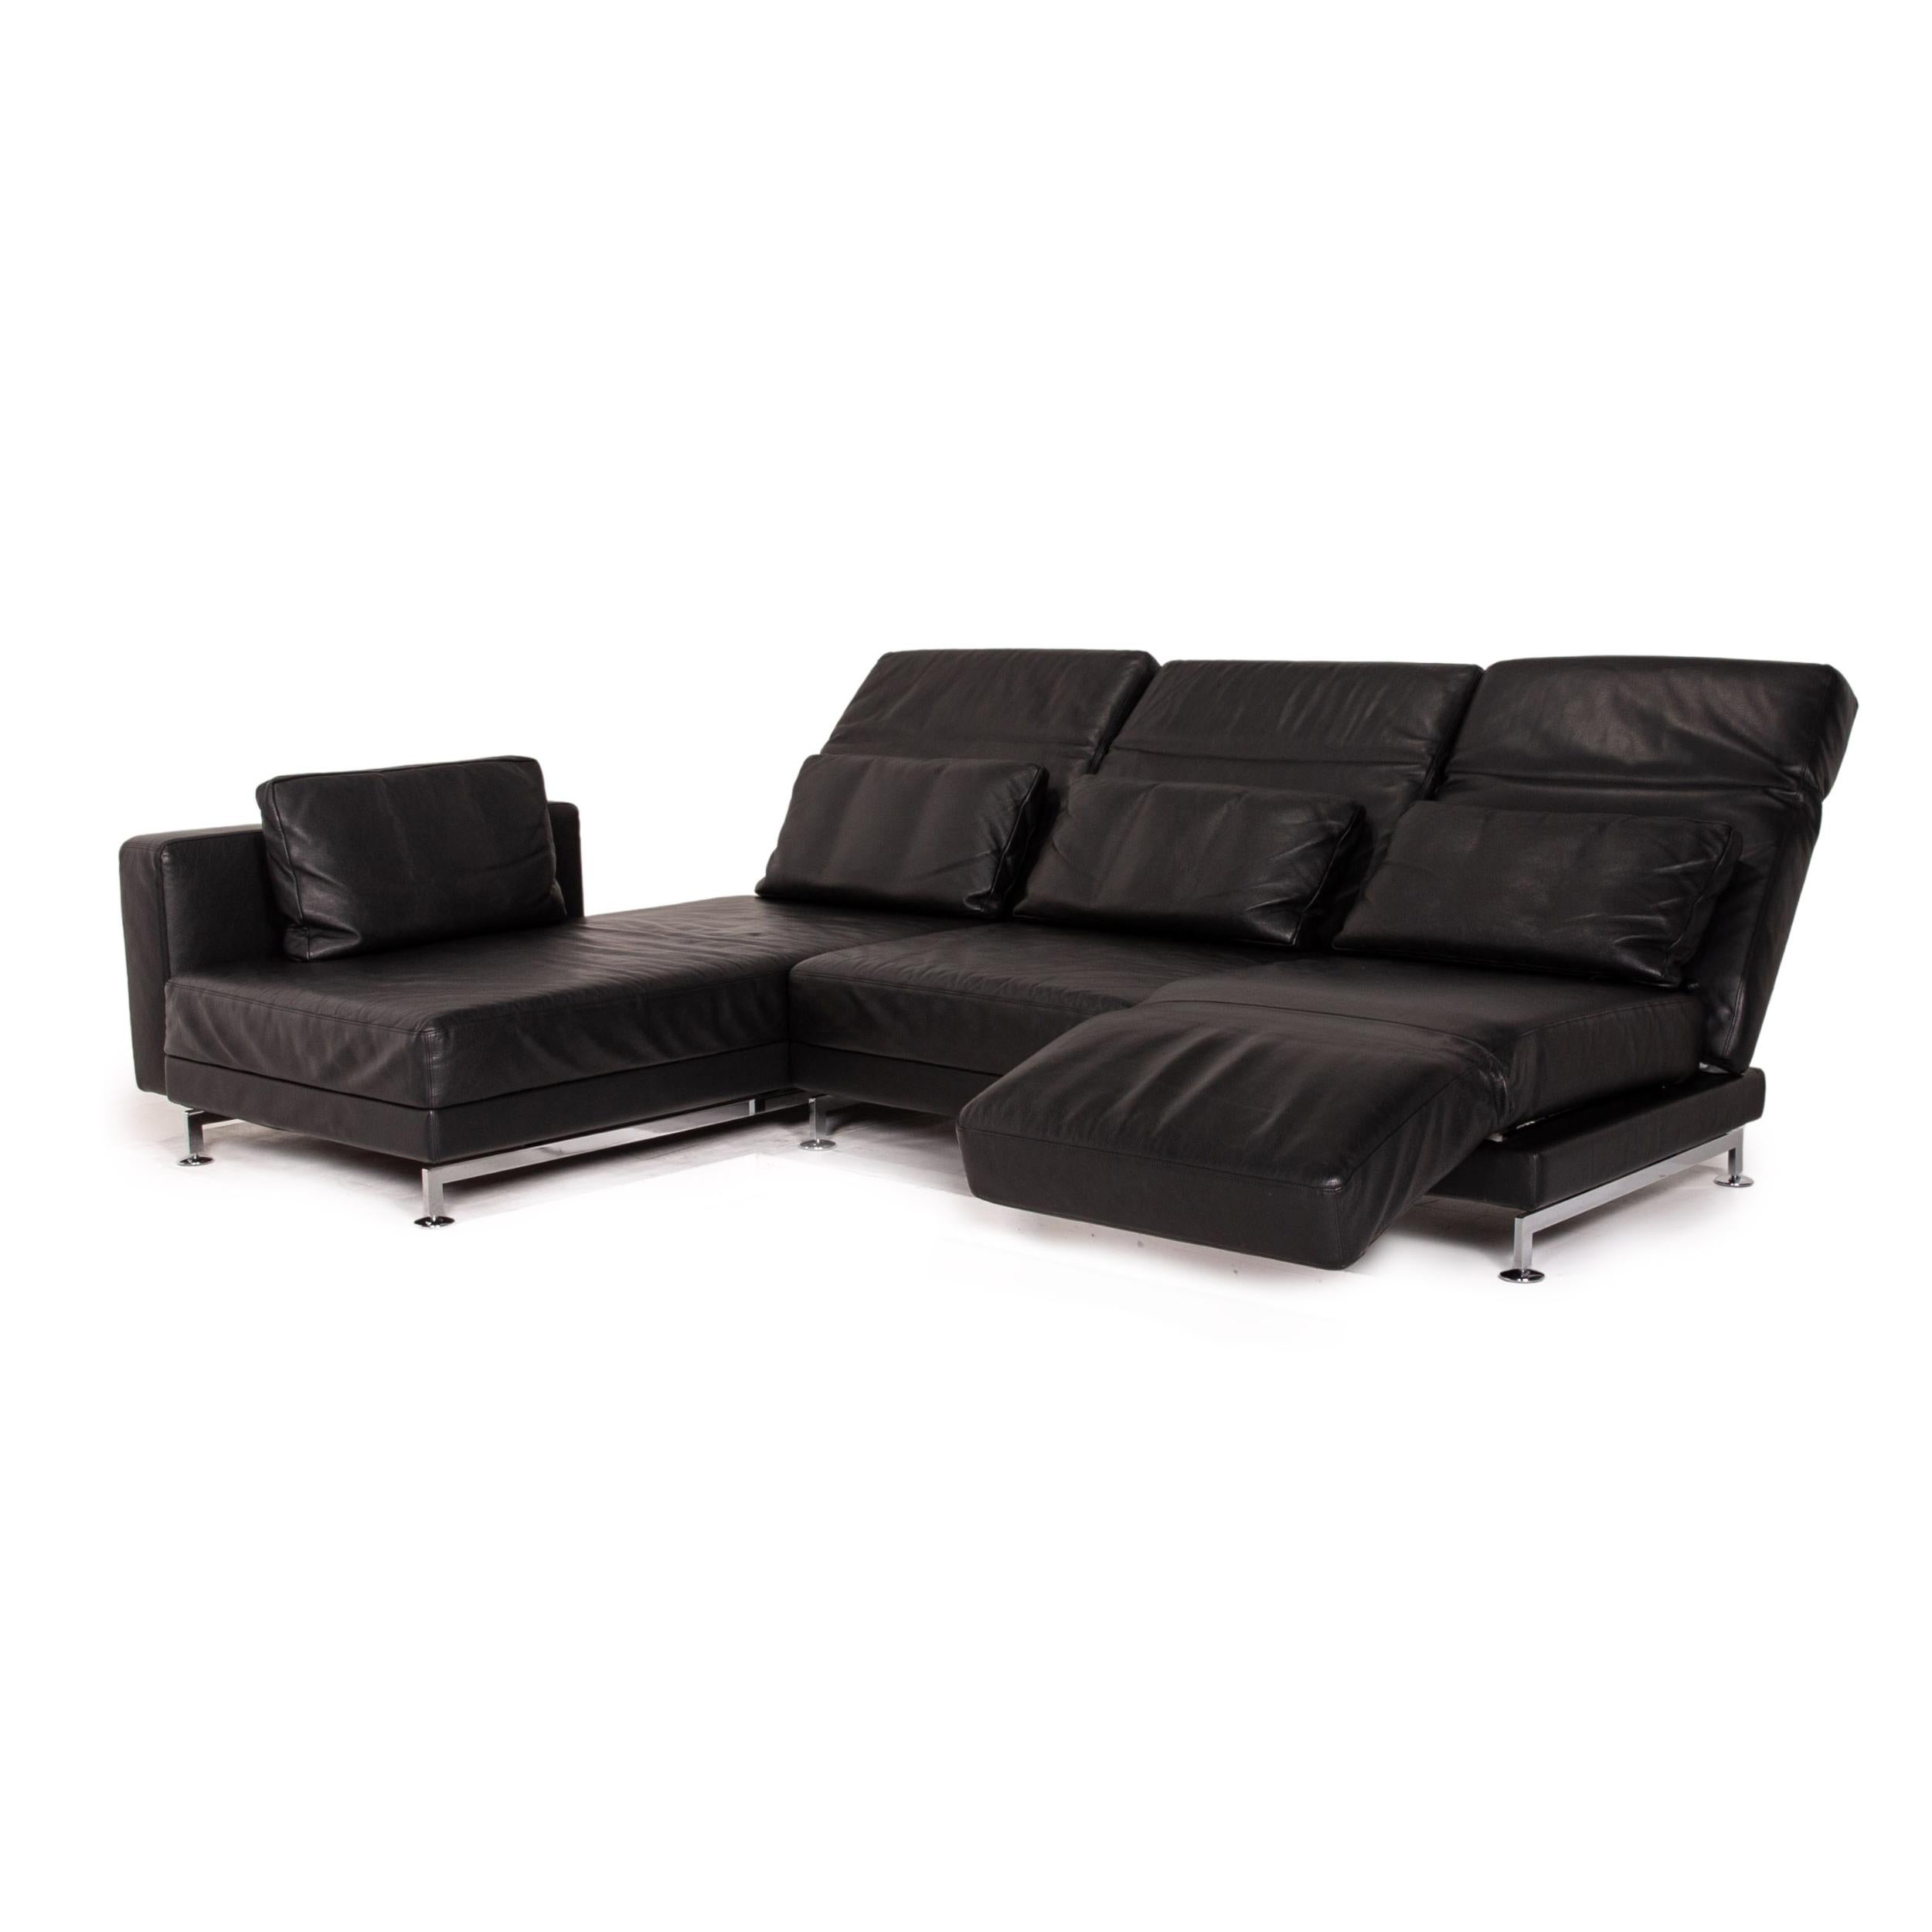 Modern Brühl & Sippold Moule Leather Corner Sofa Black Function Relax Function Couch